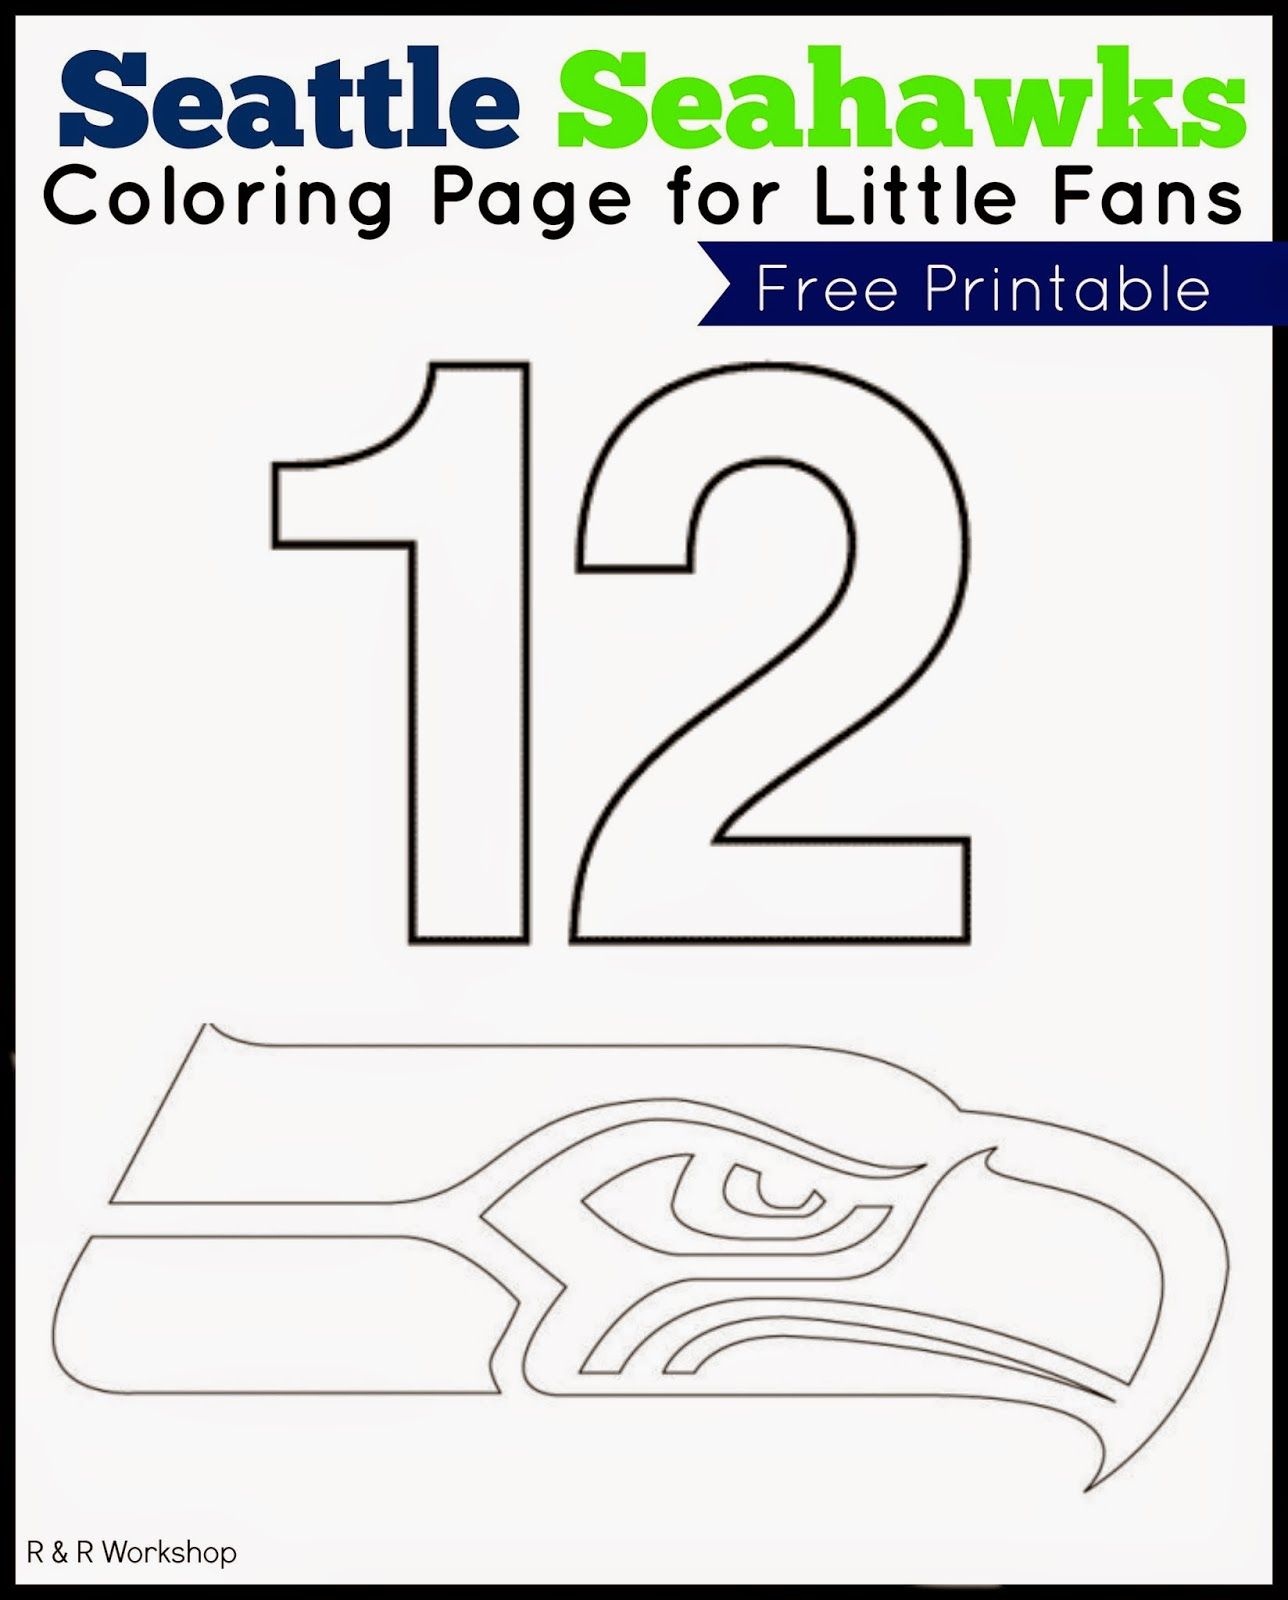 Free Printable Seahawks Coloring Pages Free Printable A to Z